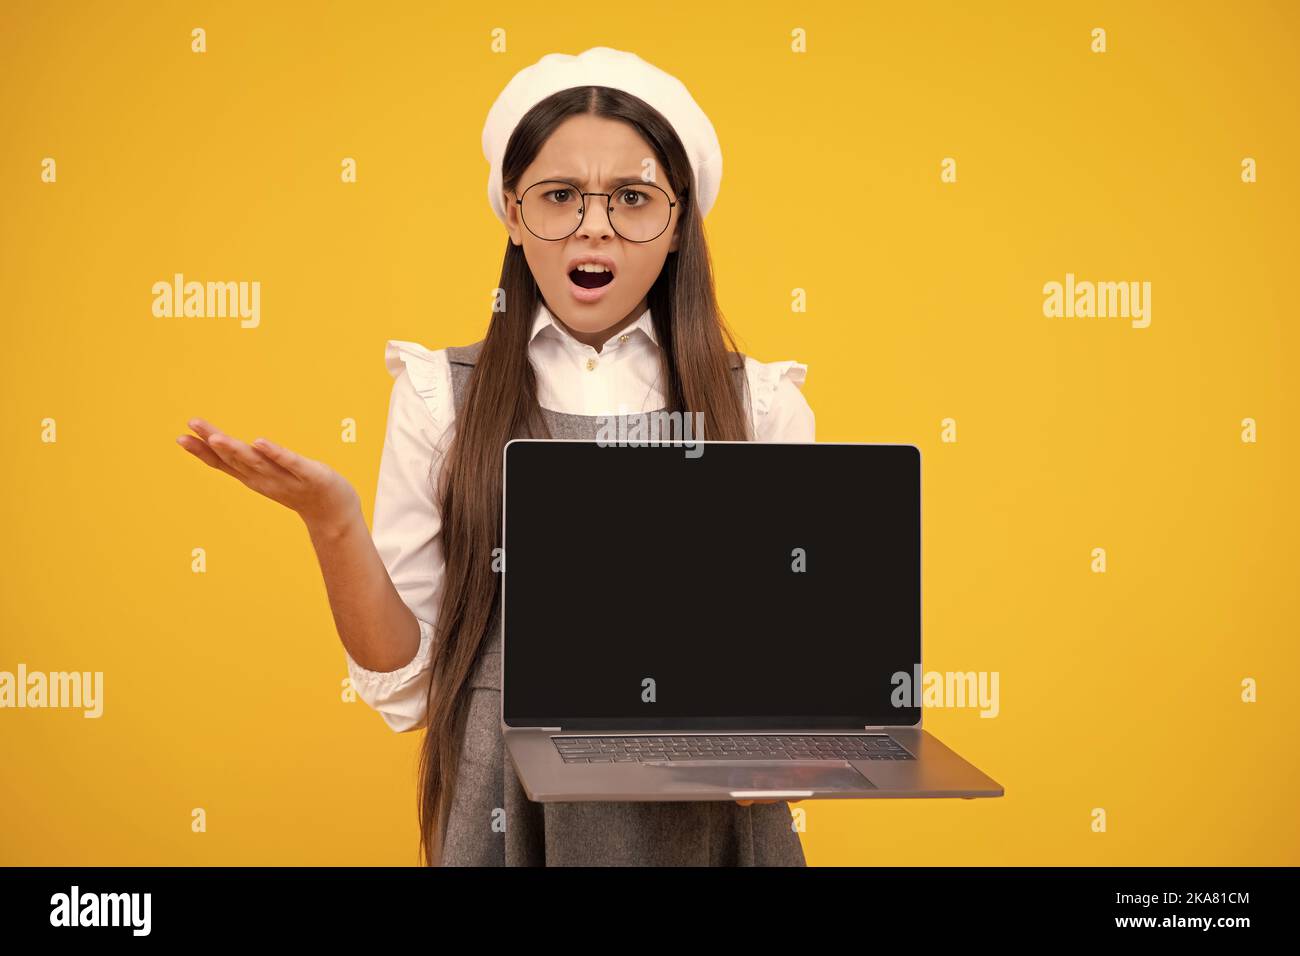 Student school girl with laptop on isolated studio background. Video online webinar, learn on laptop, elearning lesson, pc computer call. Surprised Stock Photo